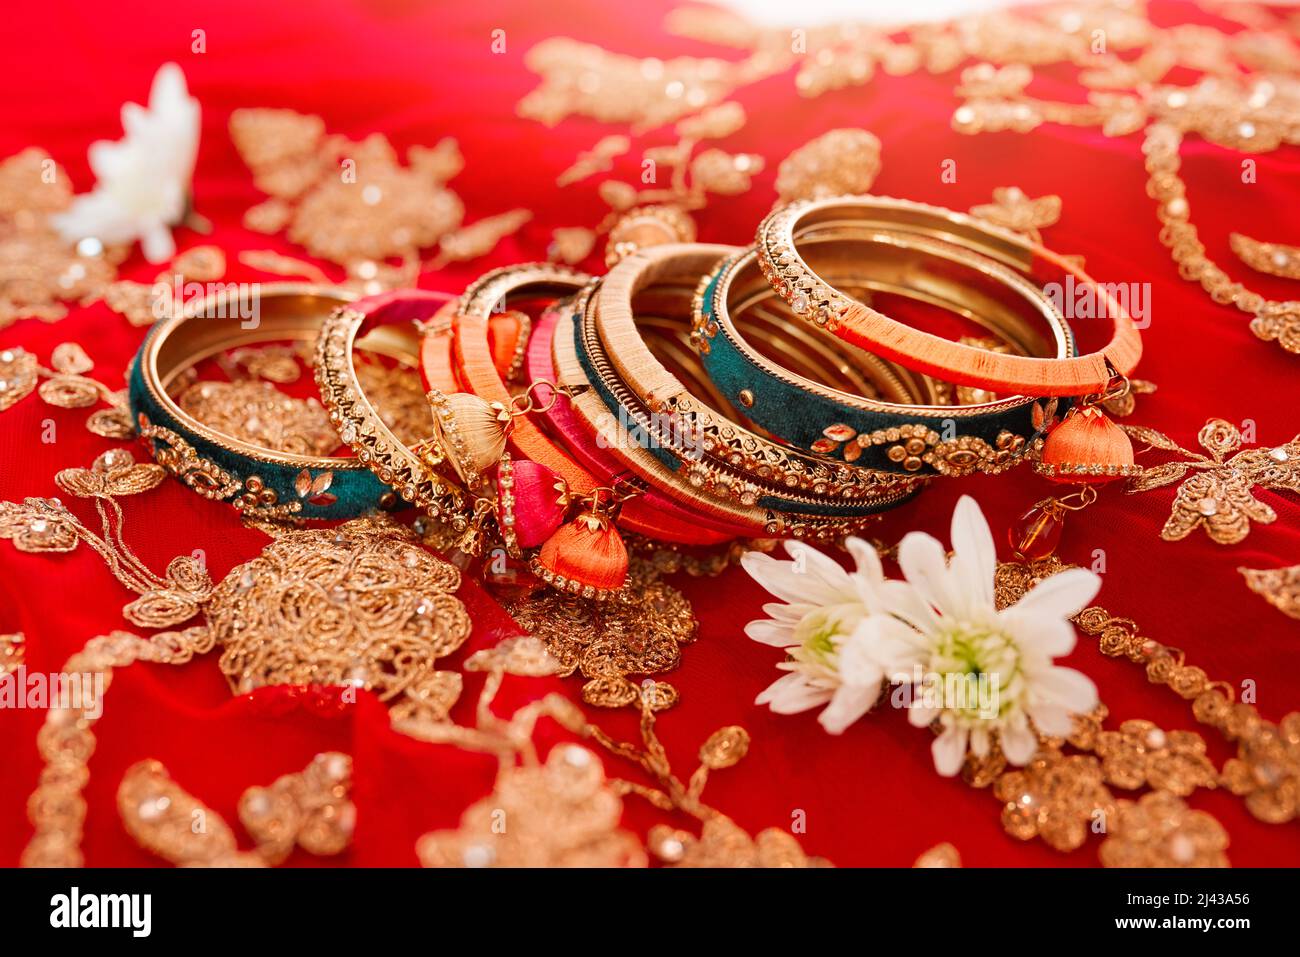 The best jewellery to get you looking your best. Shot of beautiful bangles for a bride to wear at a traditional wedding. Stock Photo